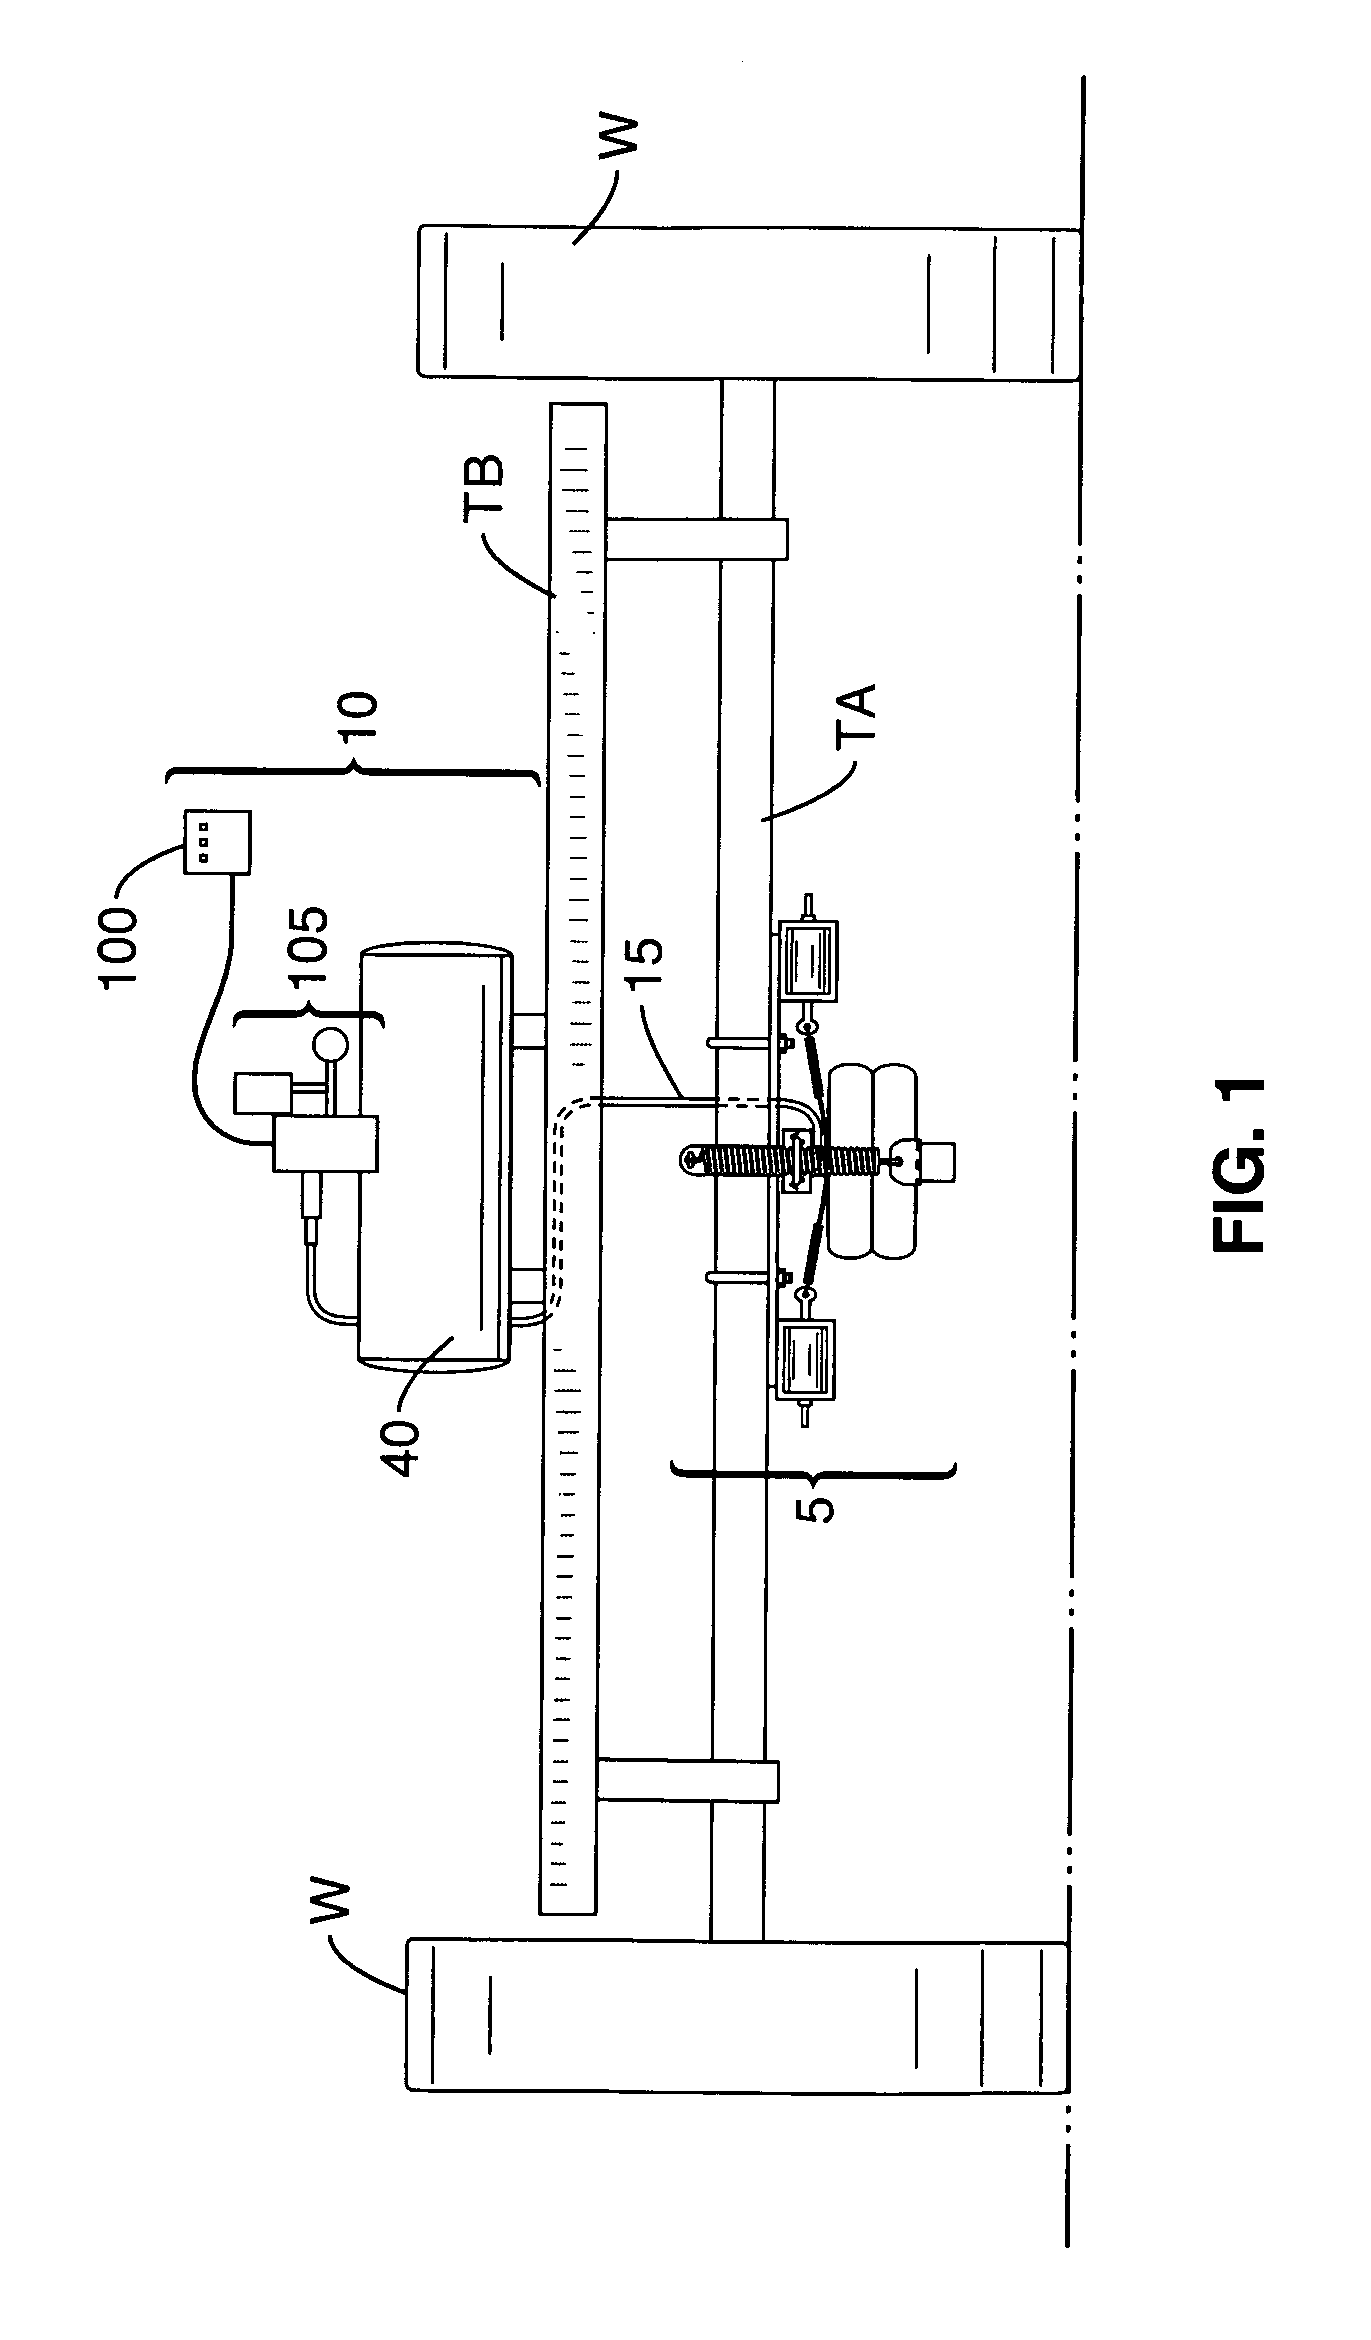 Vehicle lateral-motion apparatus